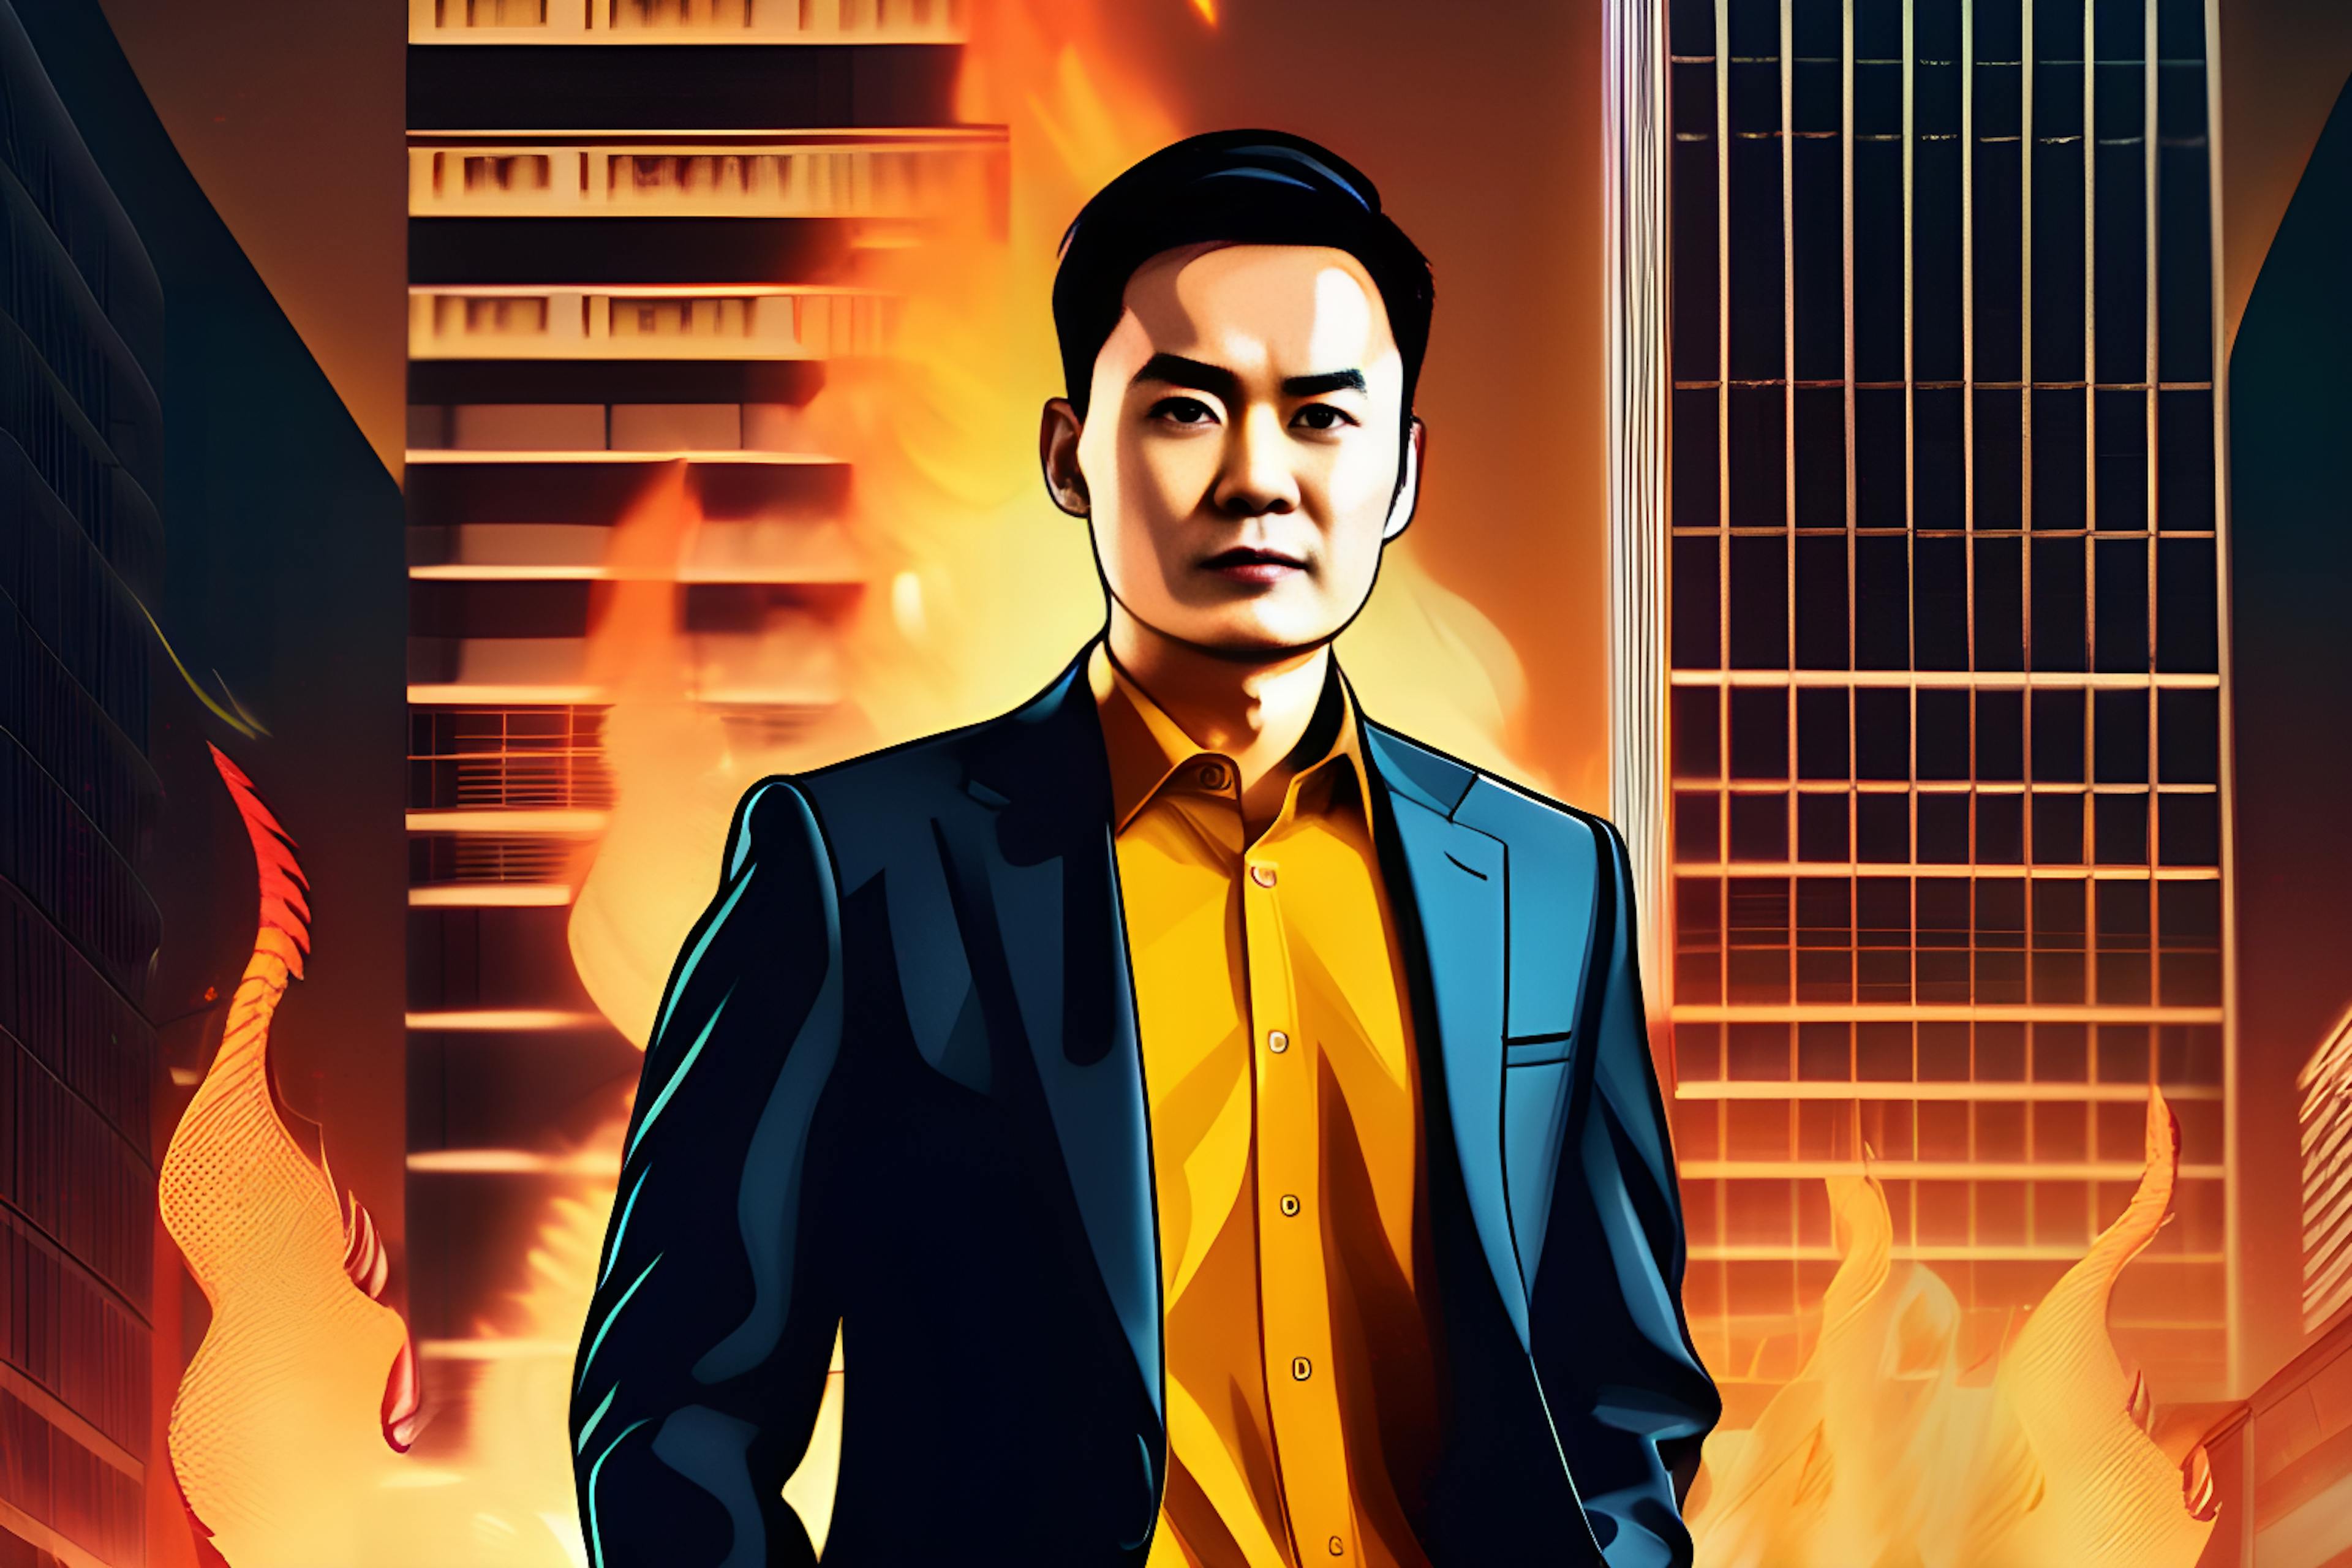 featured image - Binance CEO, CZ, Under Fire for “Not Acting in Good Faith”